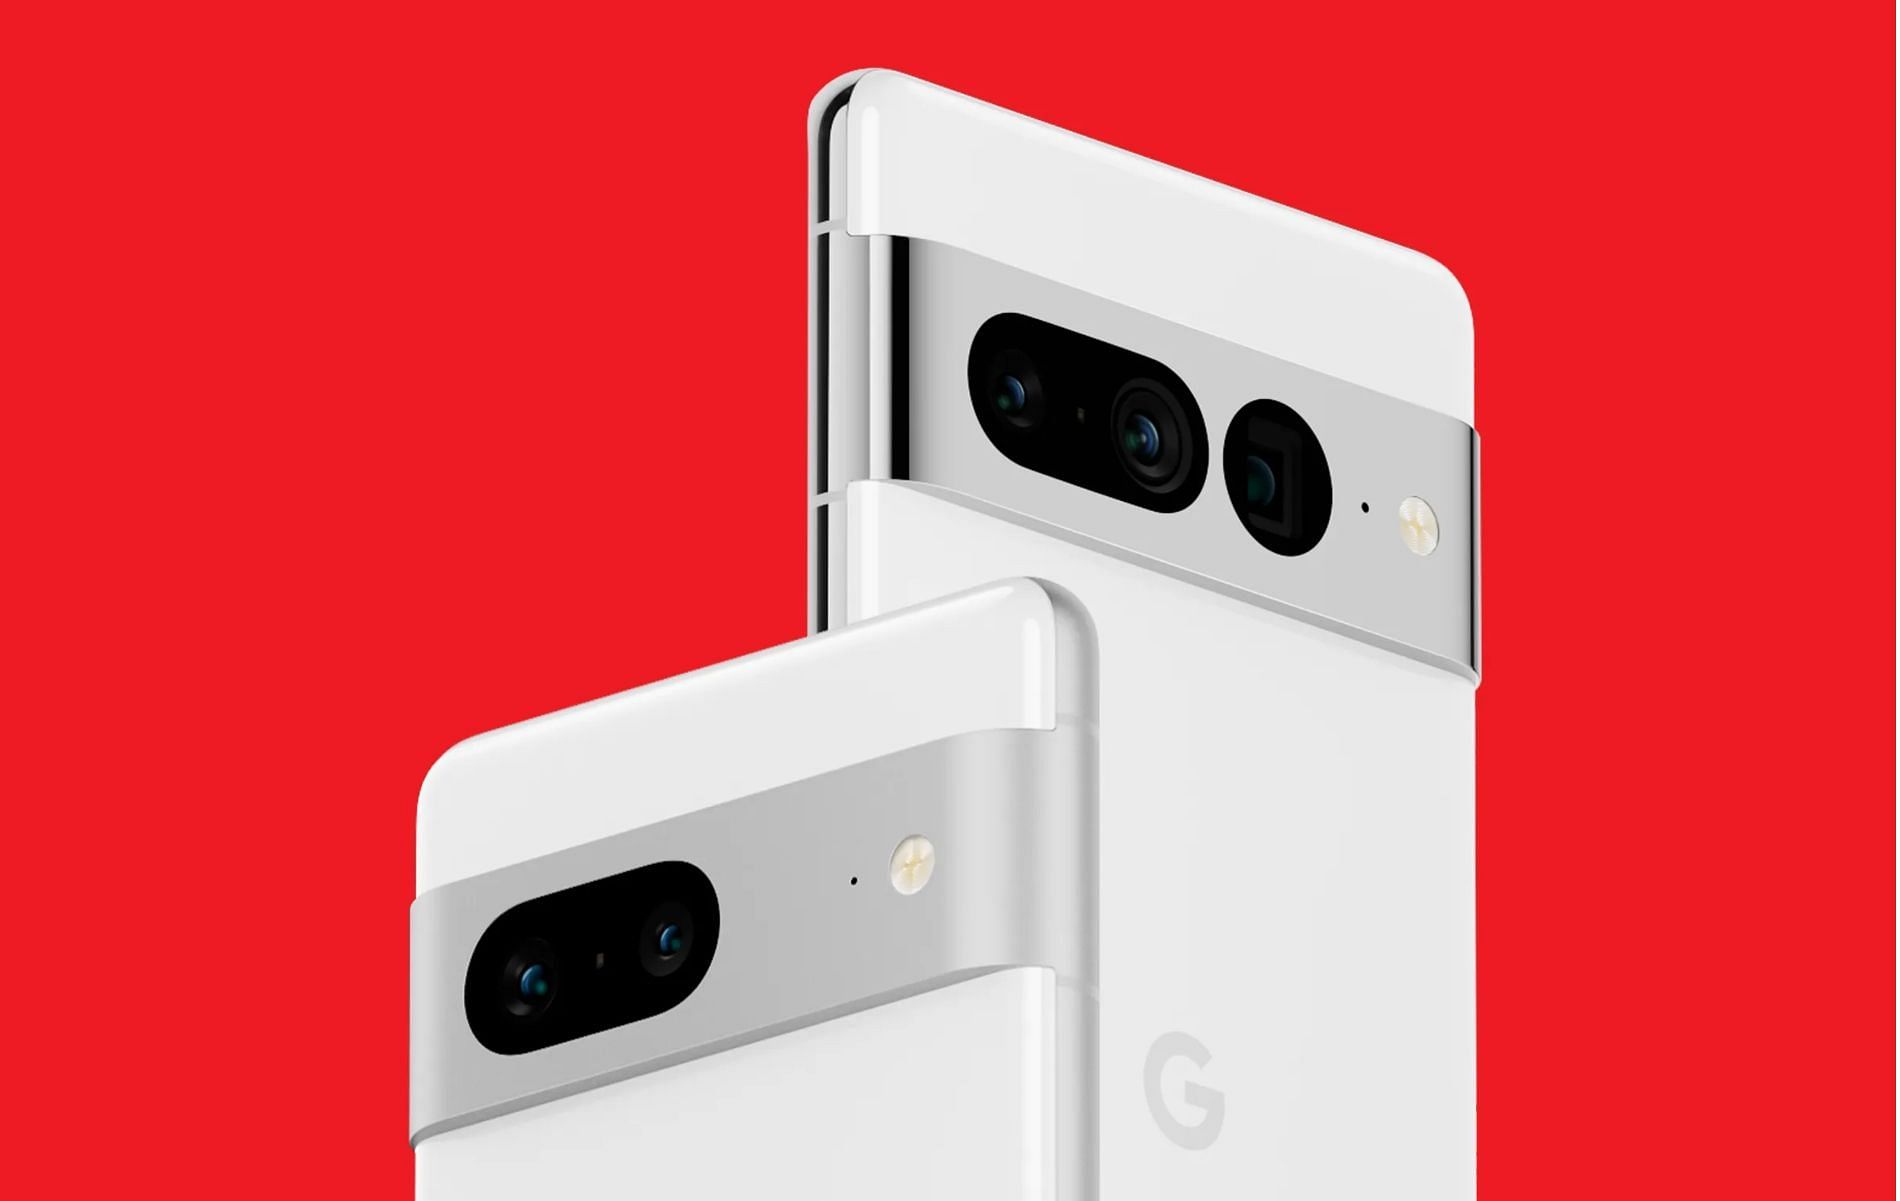 Pixel 7a could be inspired from 7 series in terms of design (image by Google)